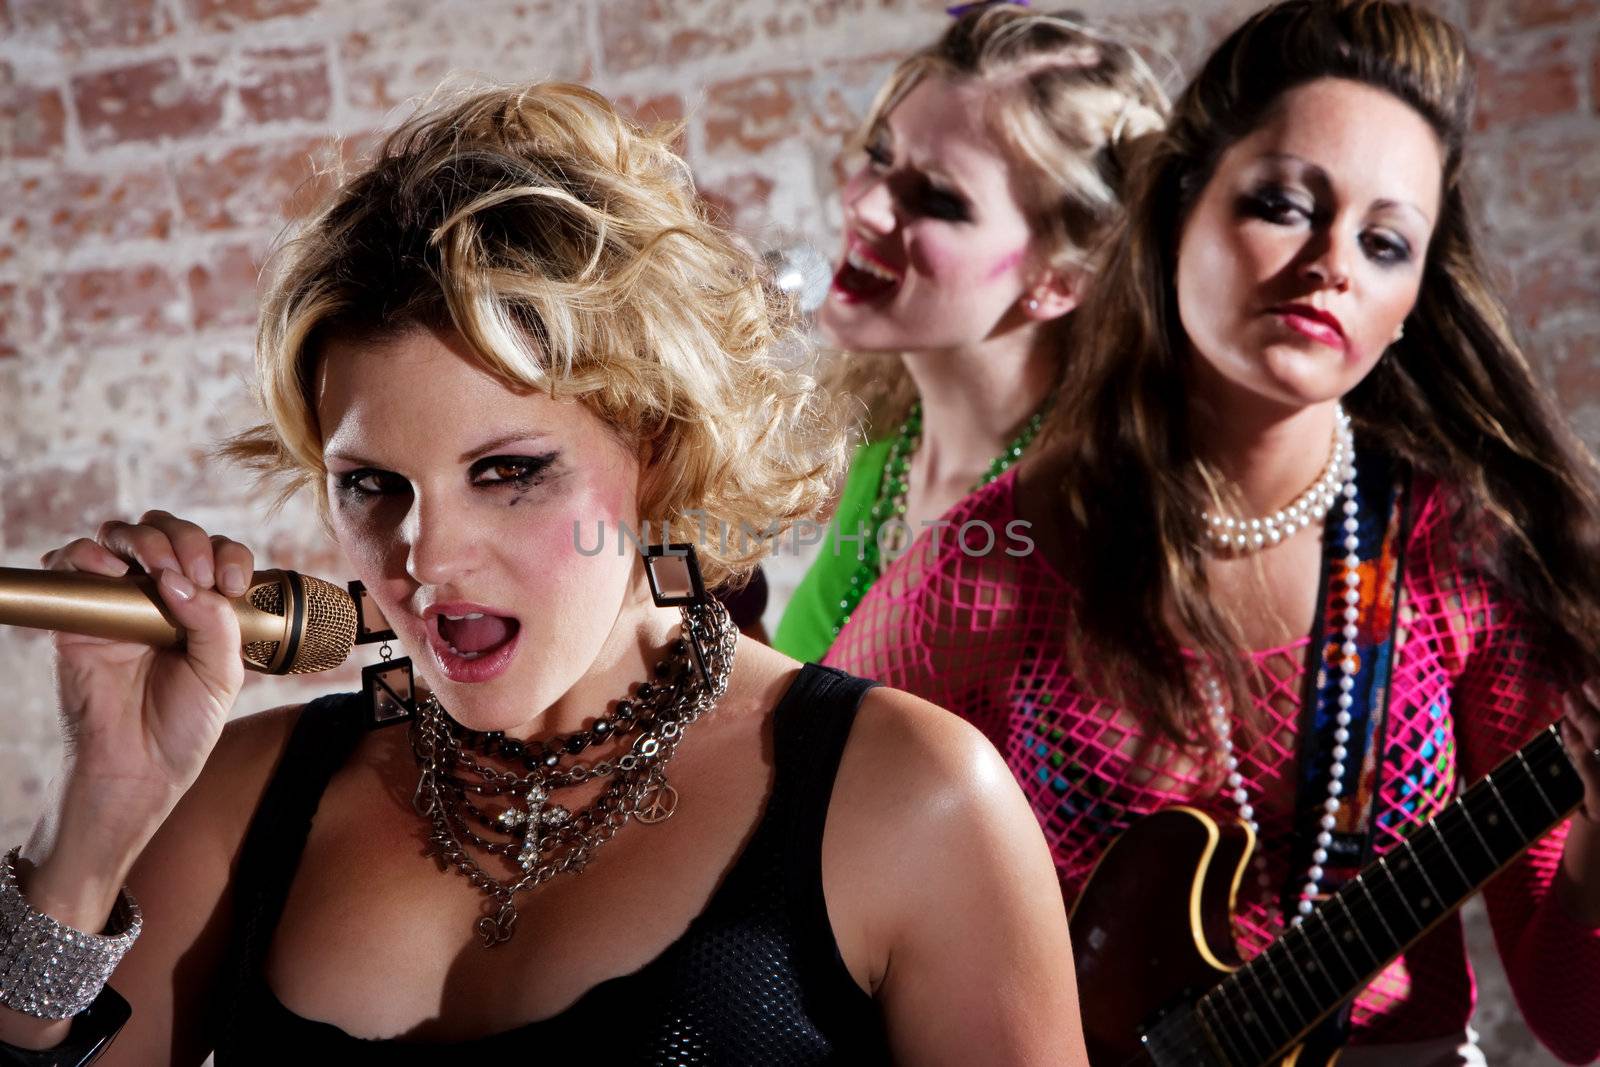 All-girl punk rock band performs in front of a brick background